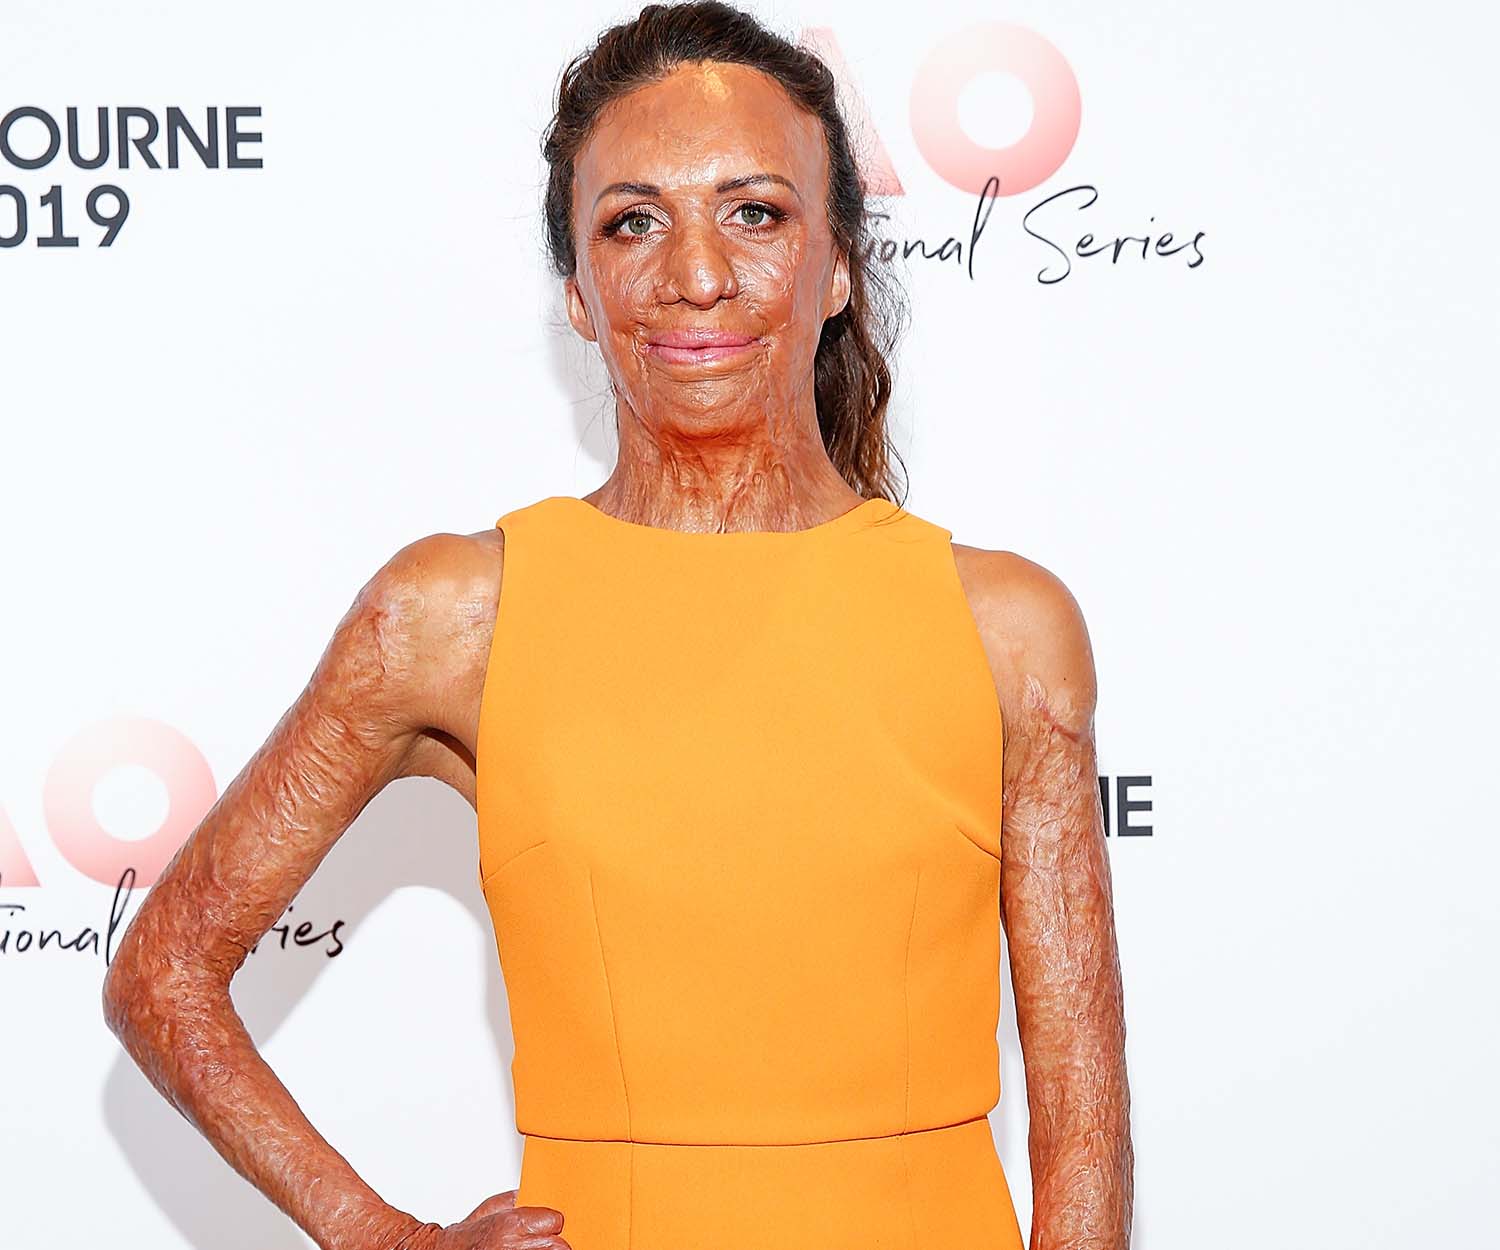 ‘It’s exhausting’: Turia Pitt shares emotional message about the reality of caring for a newborn